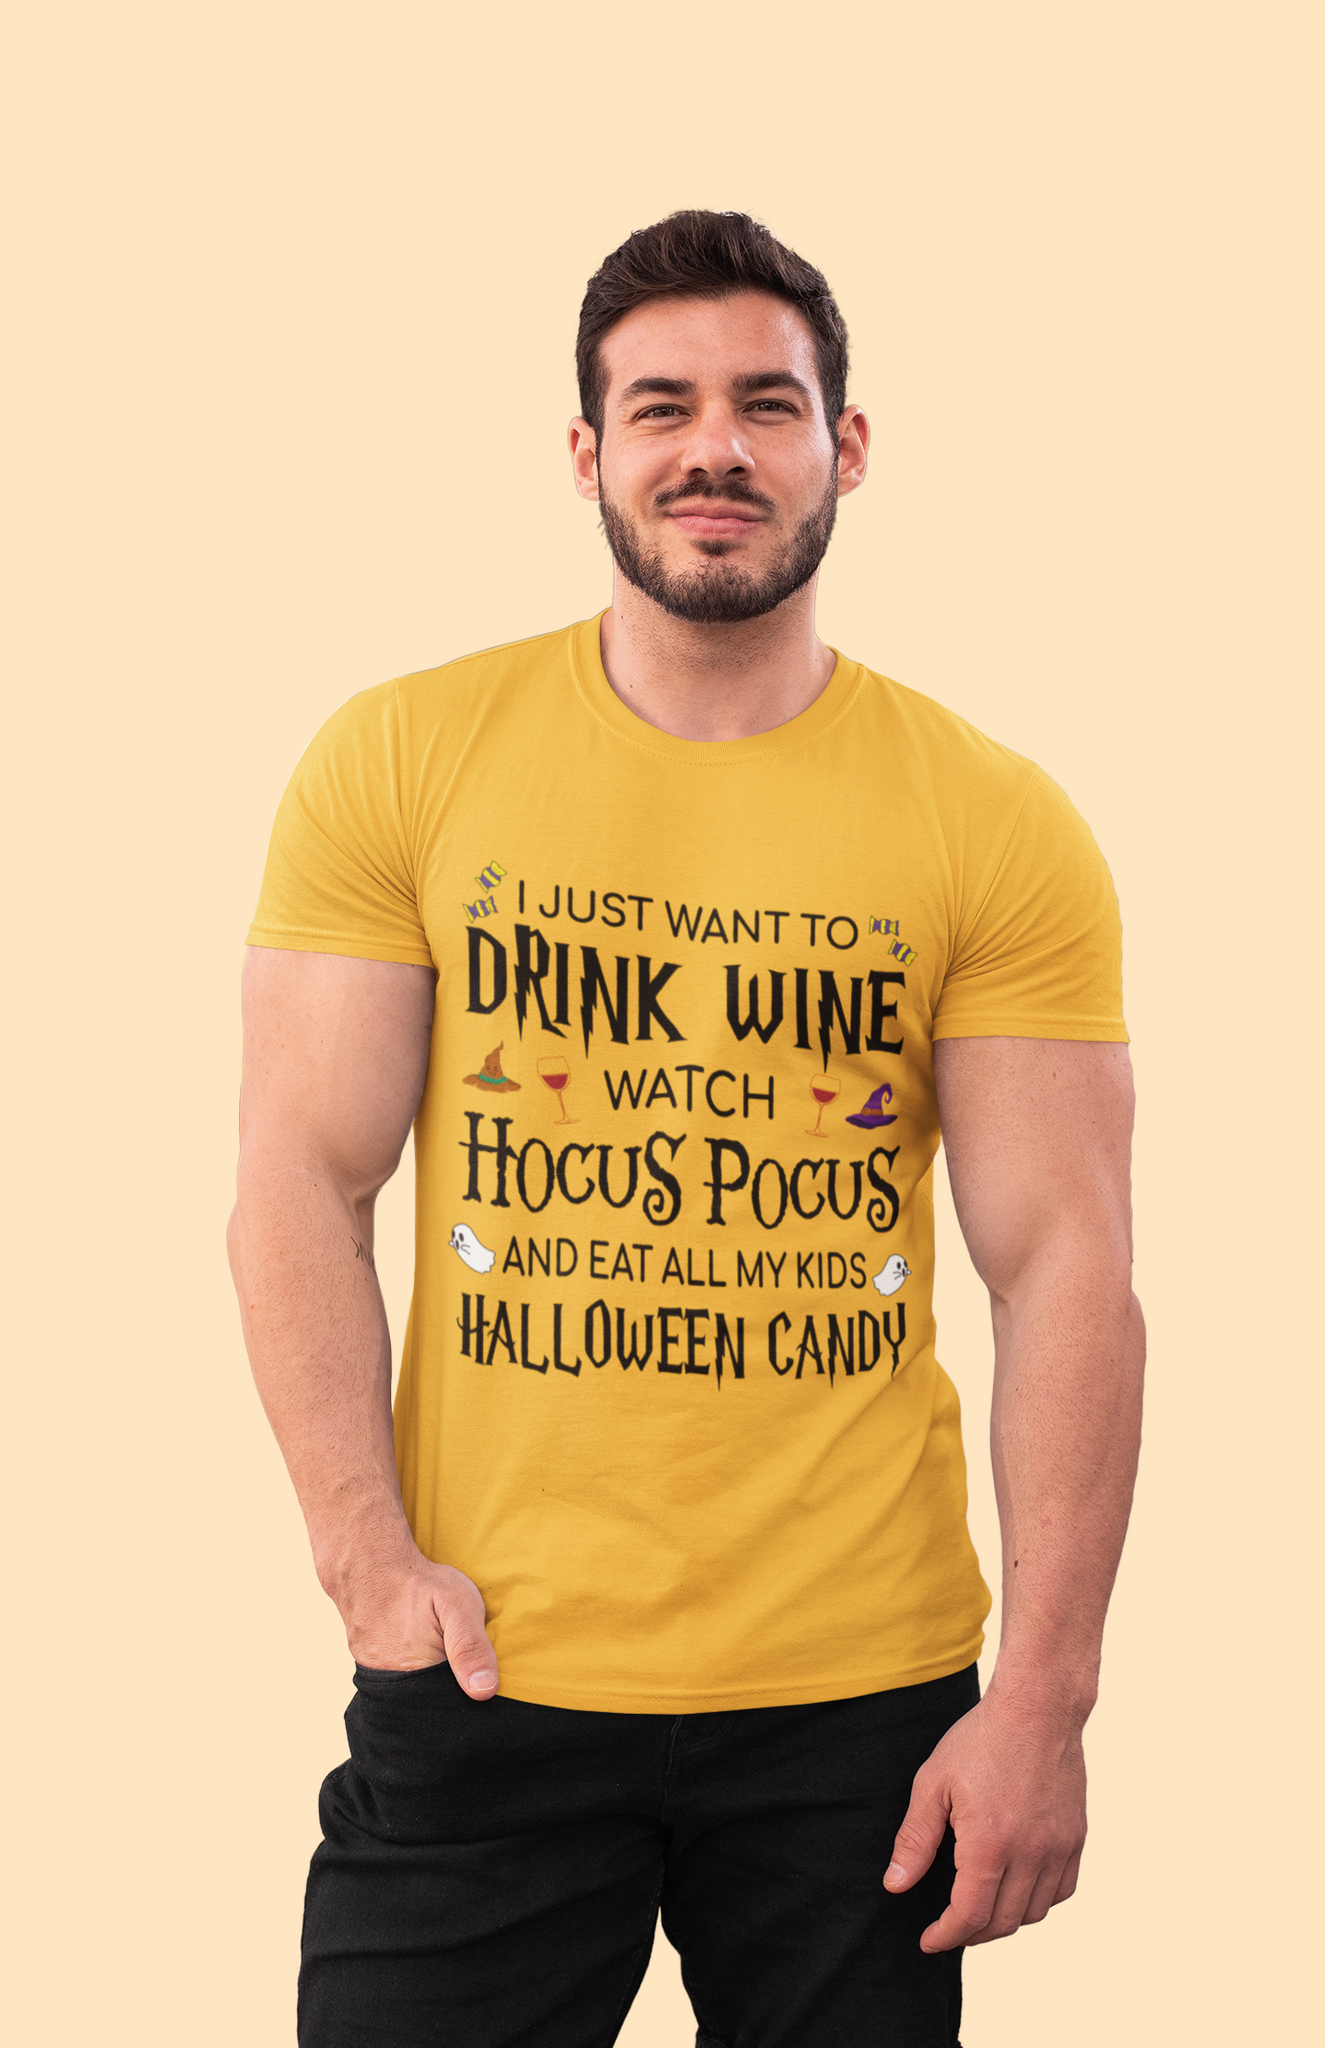 Hocus Pocus T Shirt, I Just Want To Drink Wine Watch Hocus Pocus And Eat All My Kids Halloween Candy Tshirt, Halloween Gifts